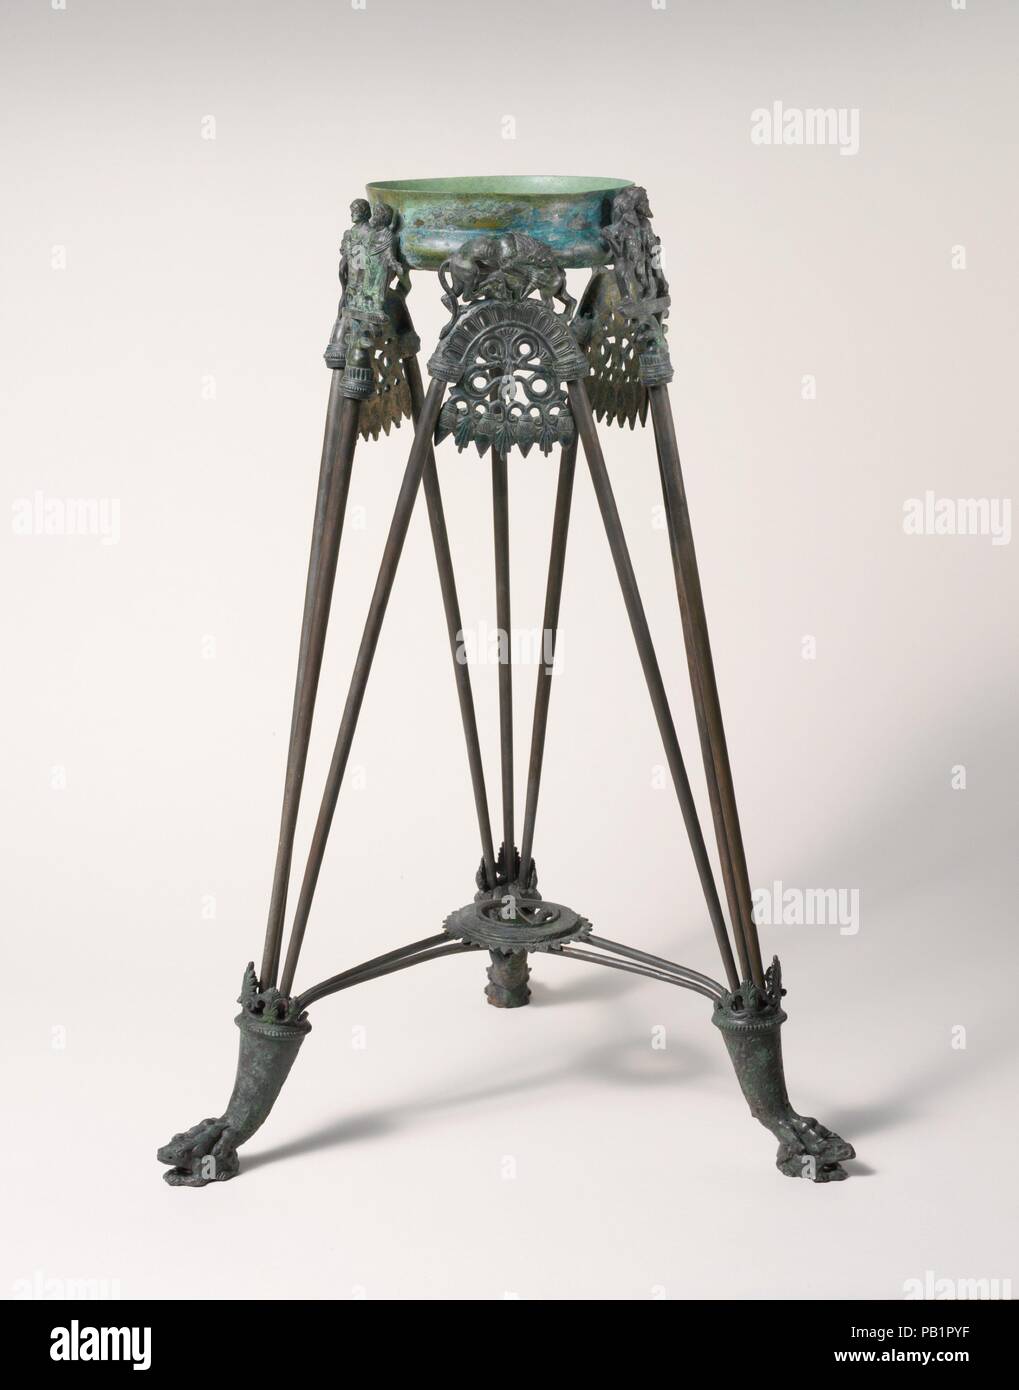 Bronze tripod. Culture: Etruscan. Dimensions: H. as restored 26 in. (66.1 cm). Date: ca. 525-500 B.C..  The city of Vulci was famous in antiquity for its production of luxury bronzes. One popular type of item was the tripod, an elaborate stand to support either a cauldron or a brazier. Tripods were produced at Vulci for about seventy years, from about 540 to 470 B.C. This example is elaborately decorated with lion's-paw feet surmounting frogs, wild beasts attacking their prey on the arches above elegant palmette motifs, and a pair of mythical subjects at the top of each of the vertical rods. T Stock Photo